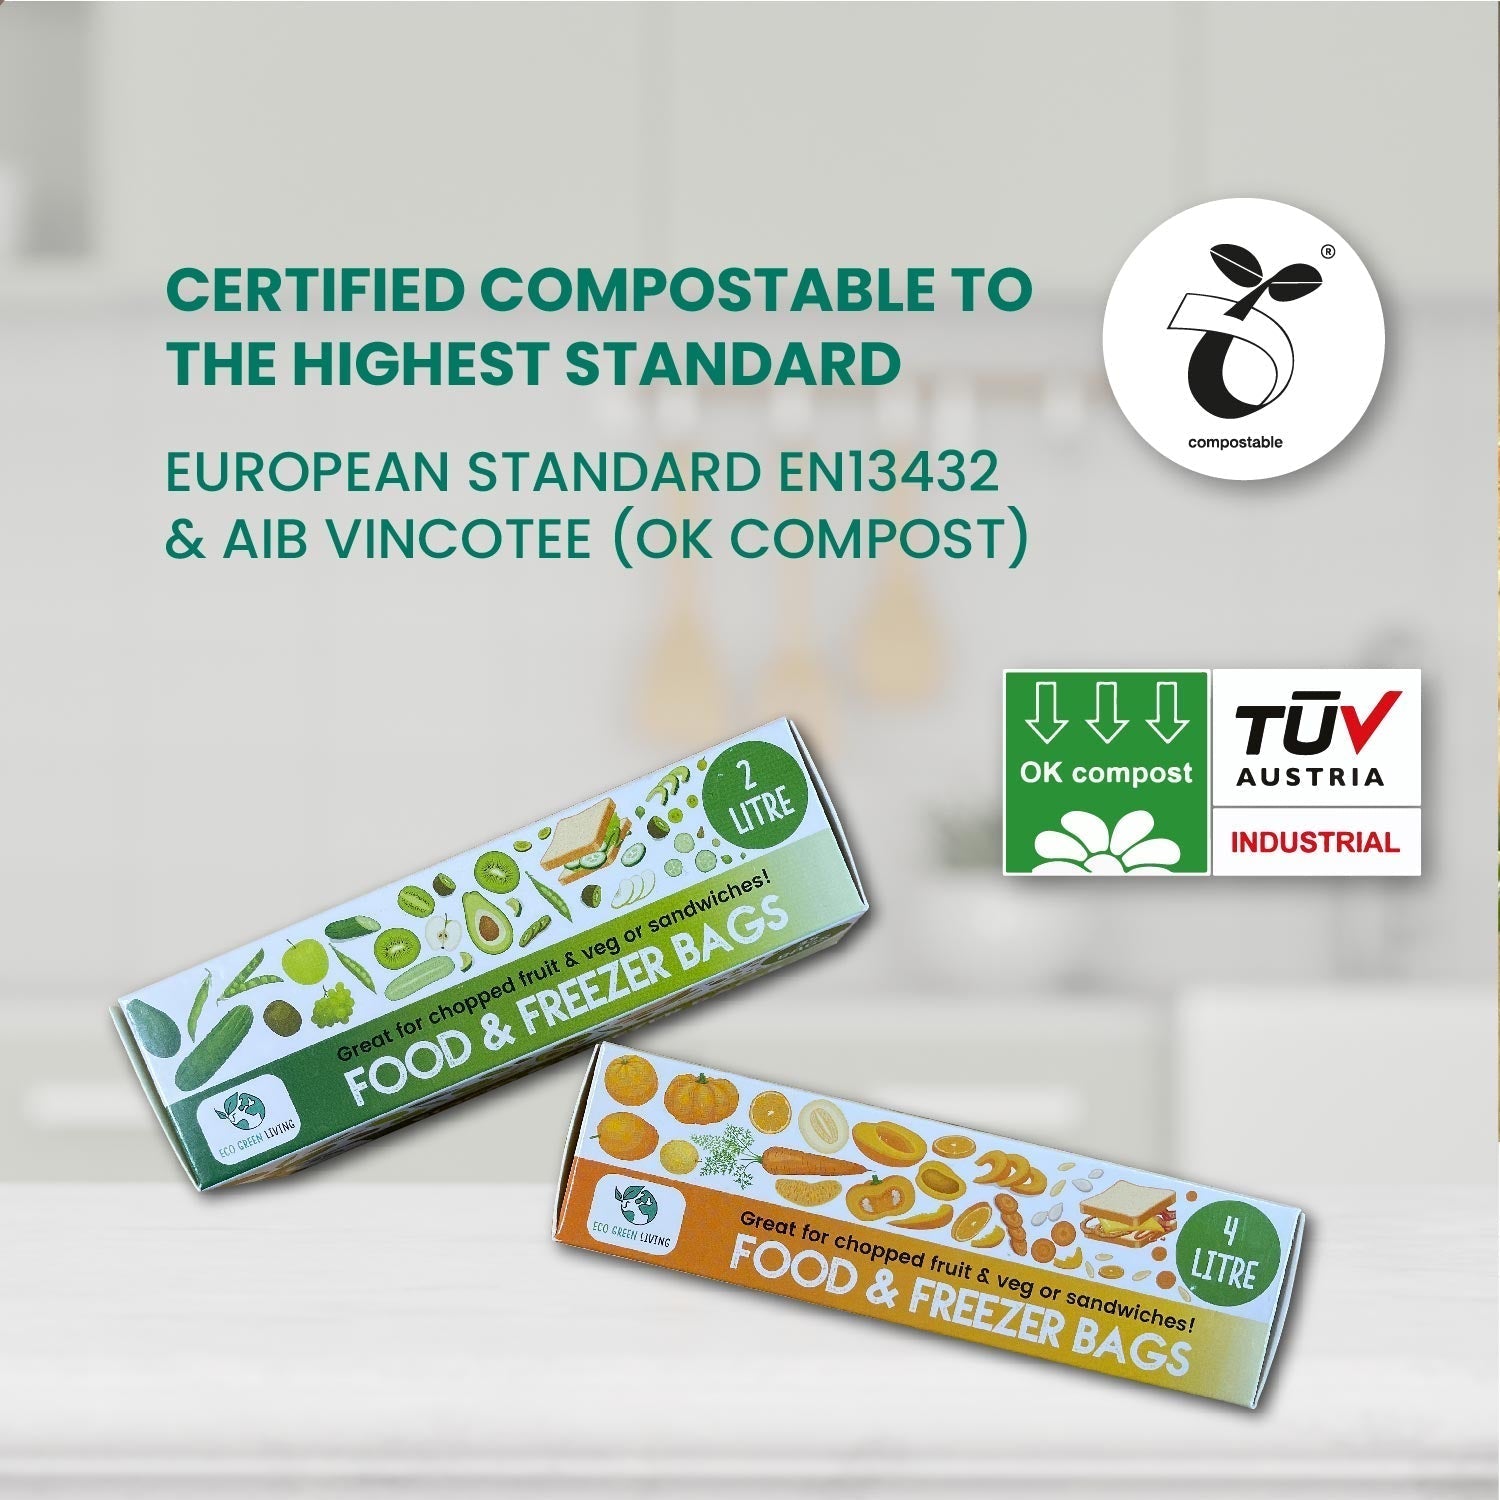 TWIN PACK Certified Compostable Food & Freezer Bags 4 Litre (2 X 25 bags) - EcoGreenLiving